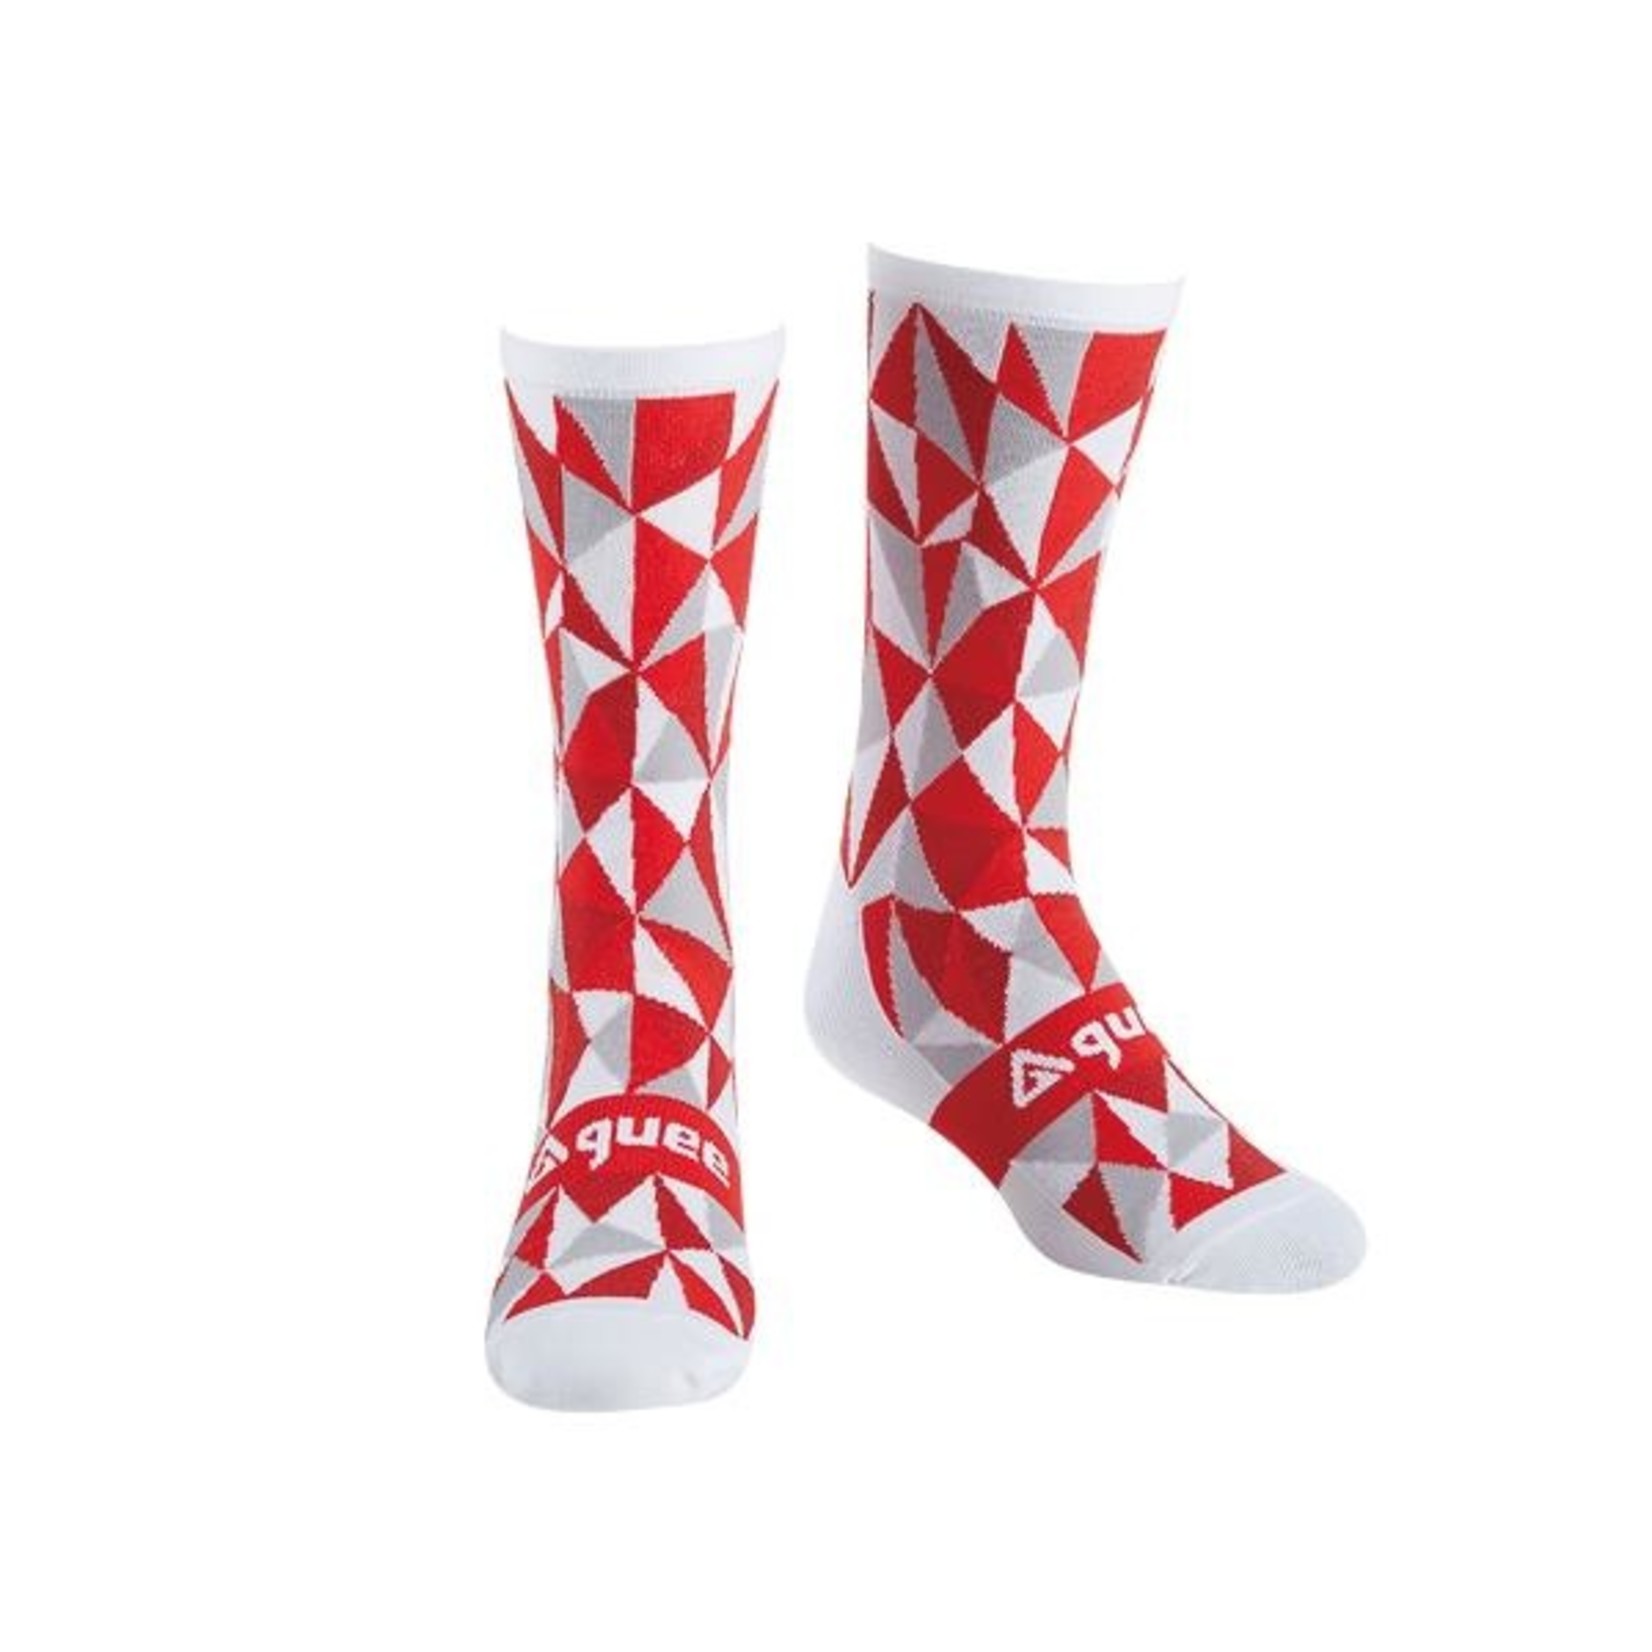 Guee Guee Socks - Geo Racefit -Colour White & Red - Size Small Material: Polyamide